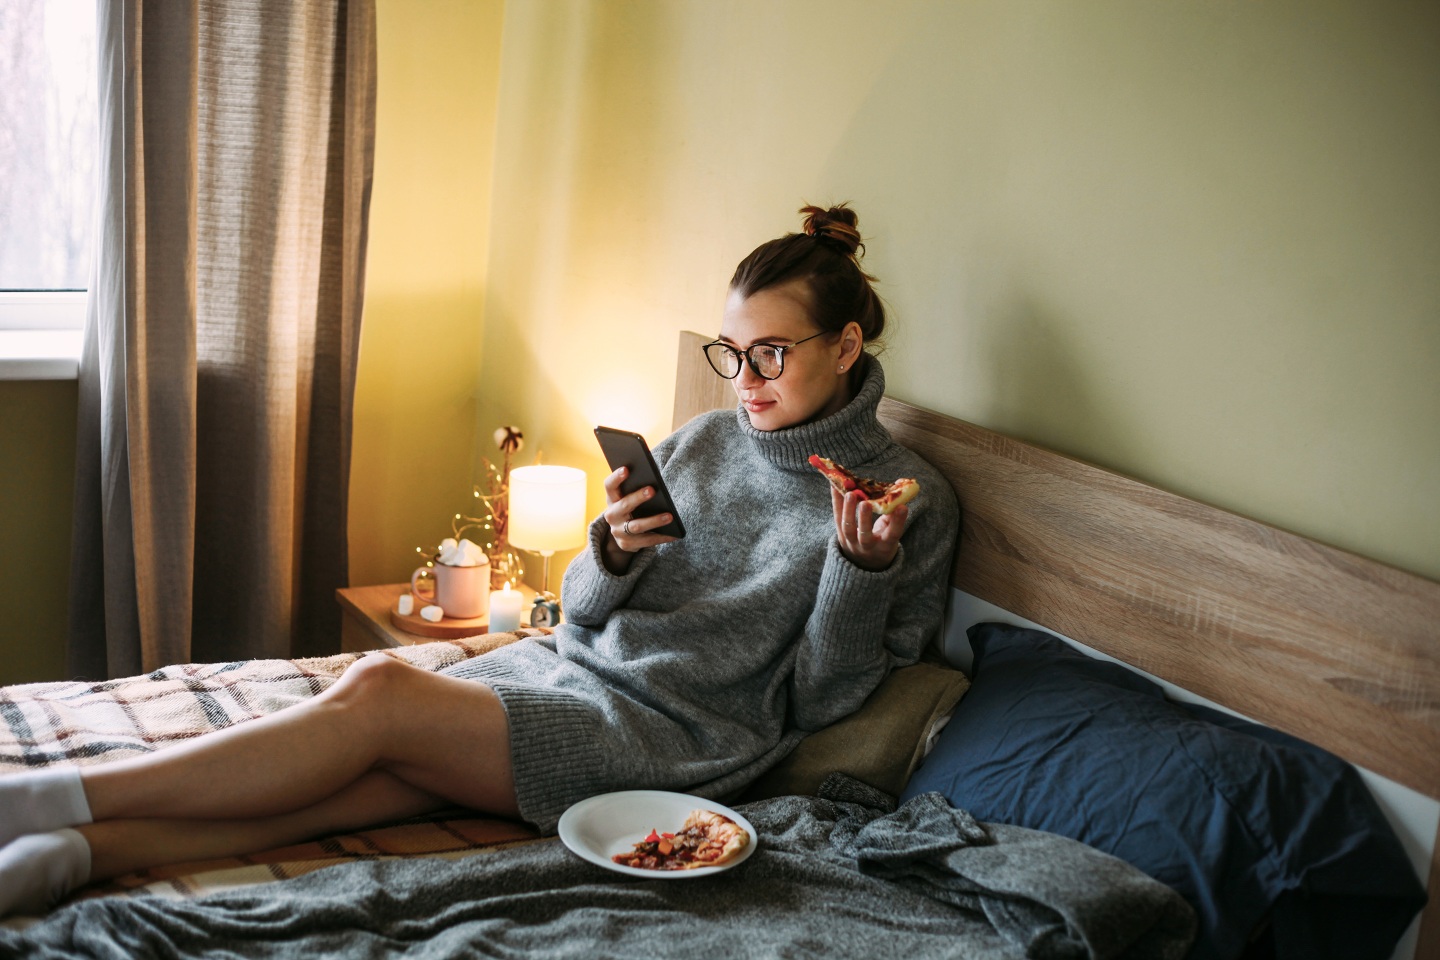 Woman using her phone and eating pizza in bed.